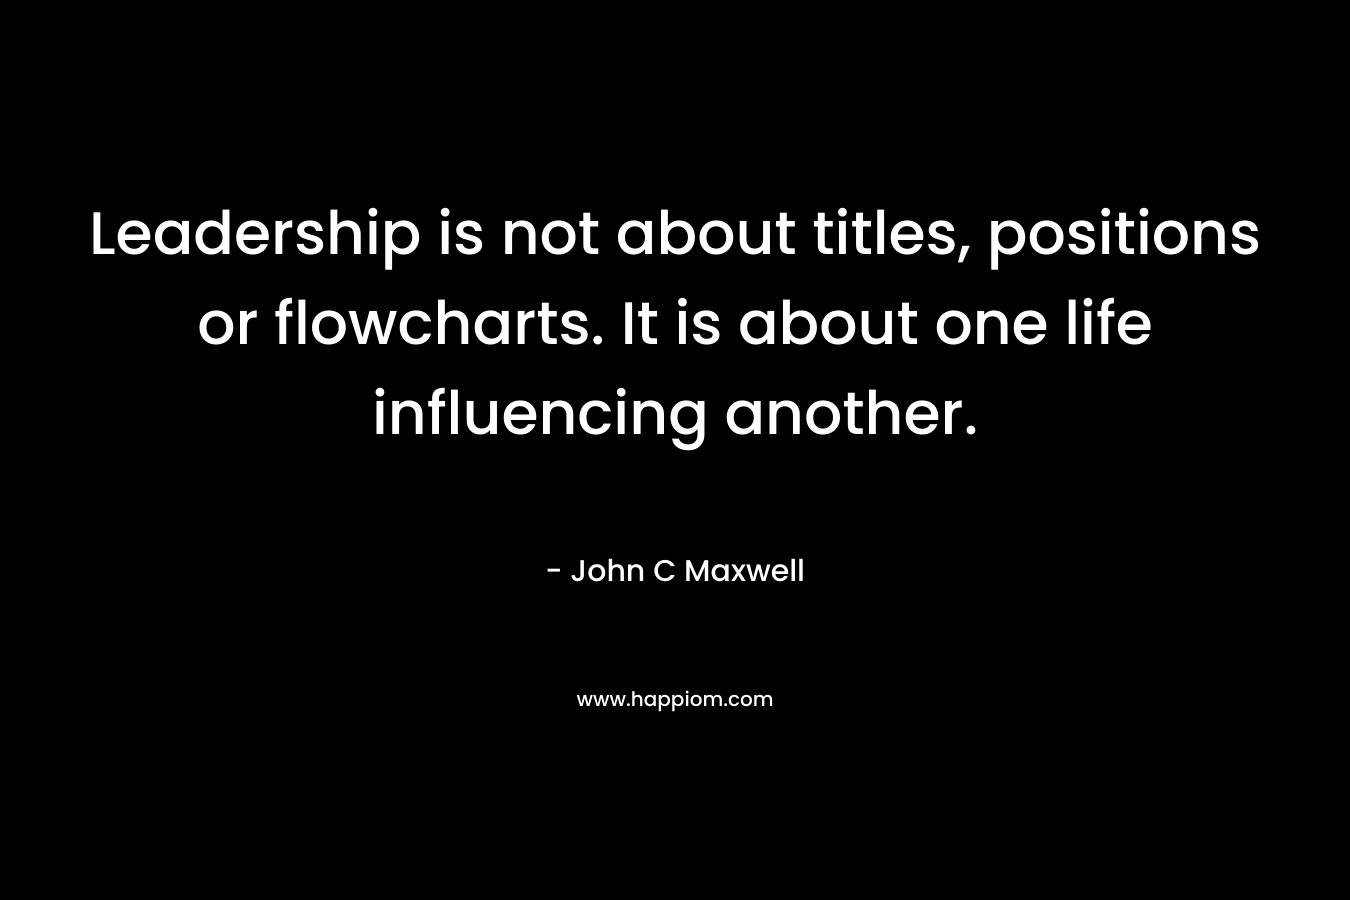 Leadership is not about titles, positions or flowcharts. It is about one life influencing another. – John C Maxwell